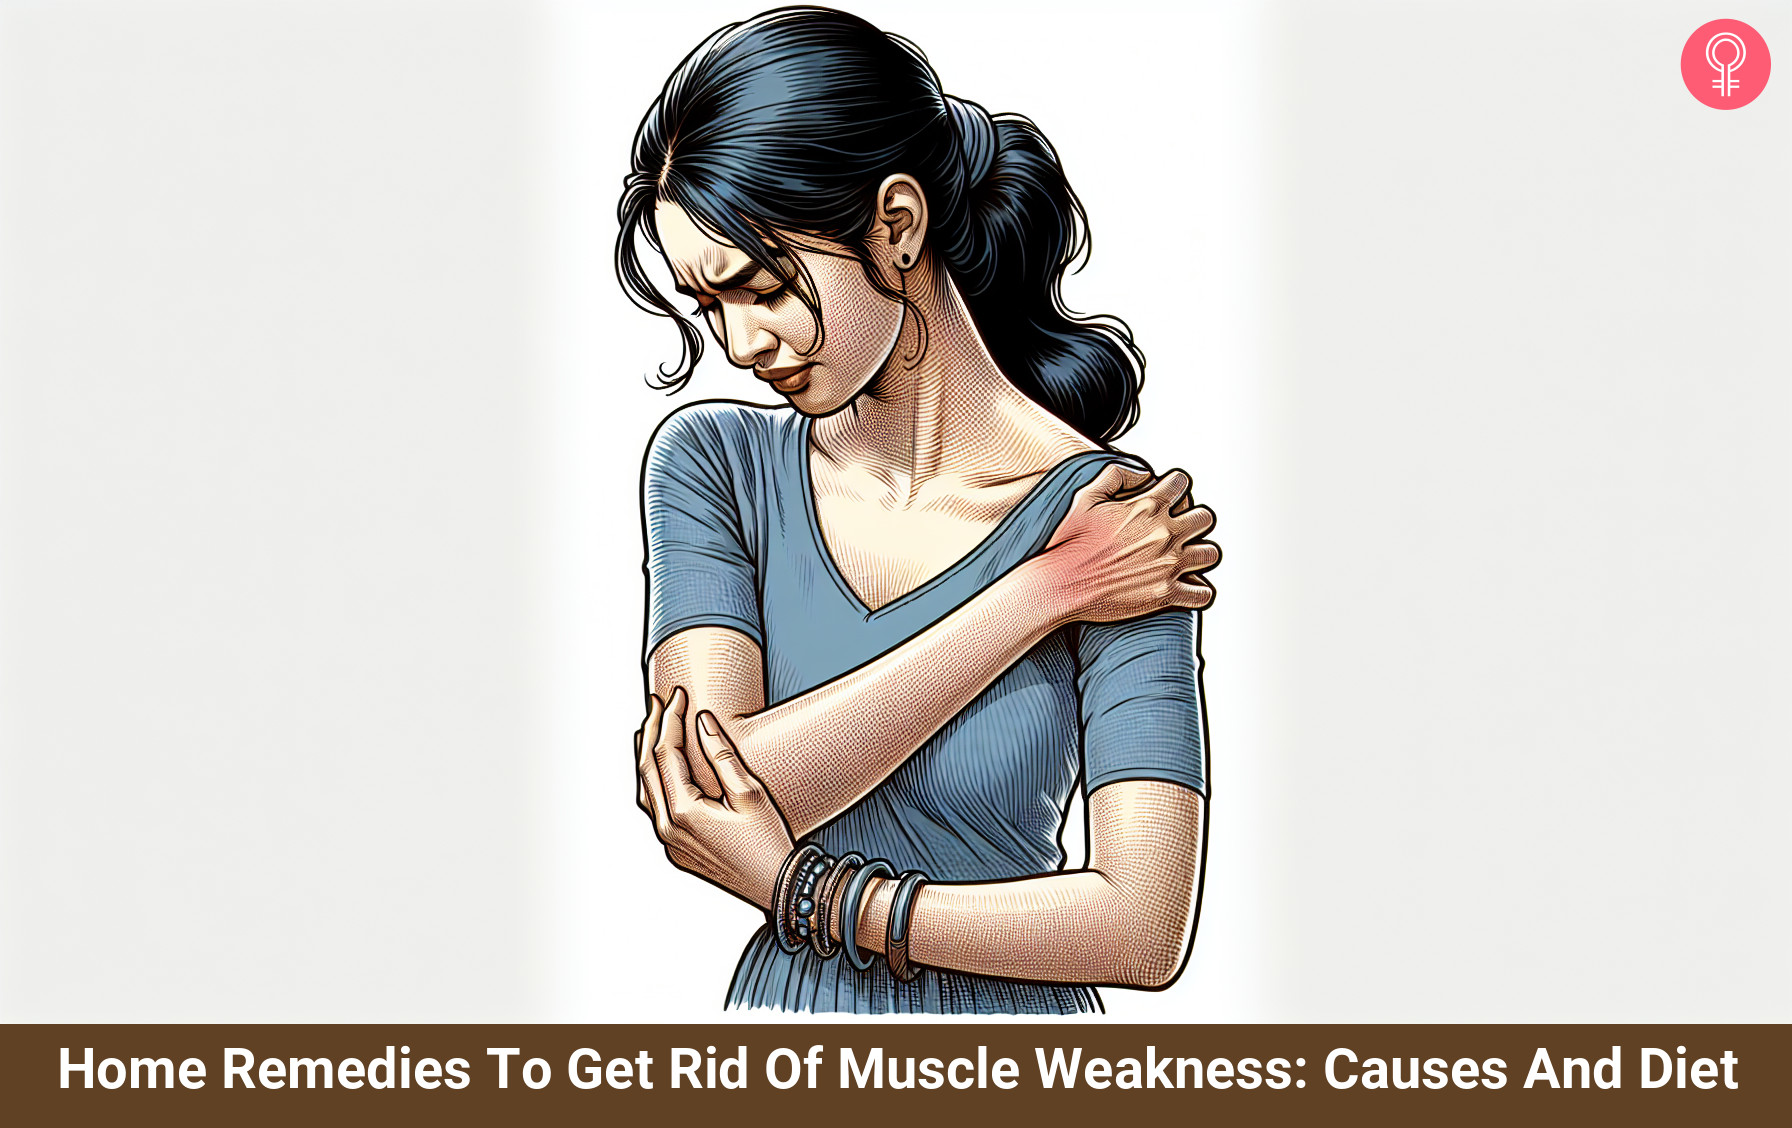 Home remedies for muscle weakness